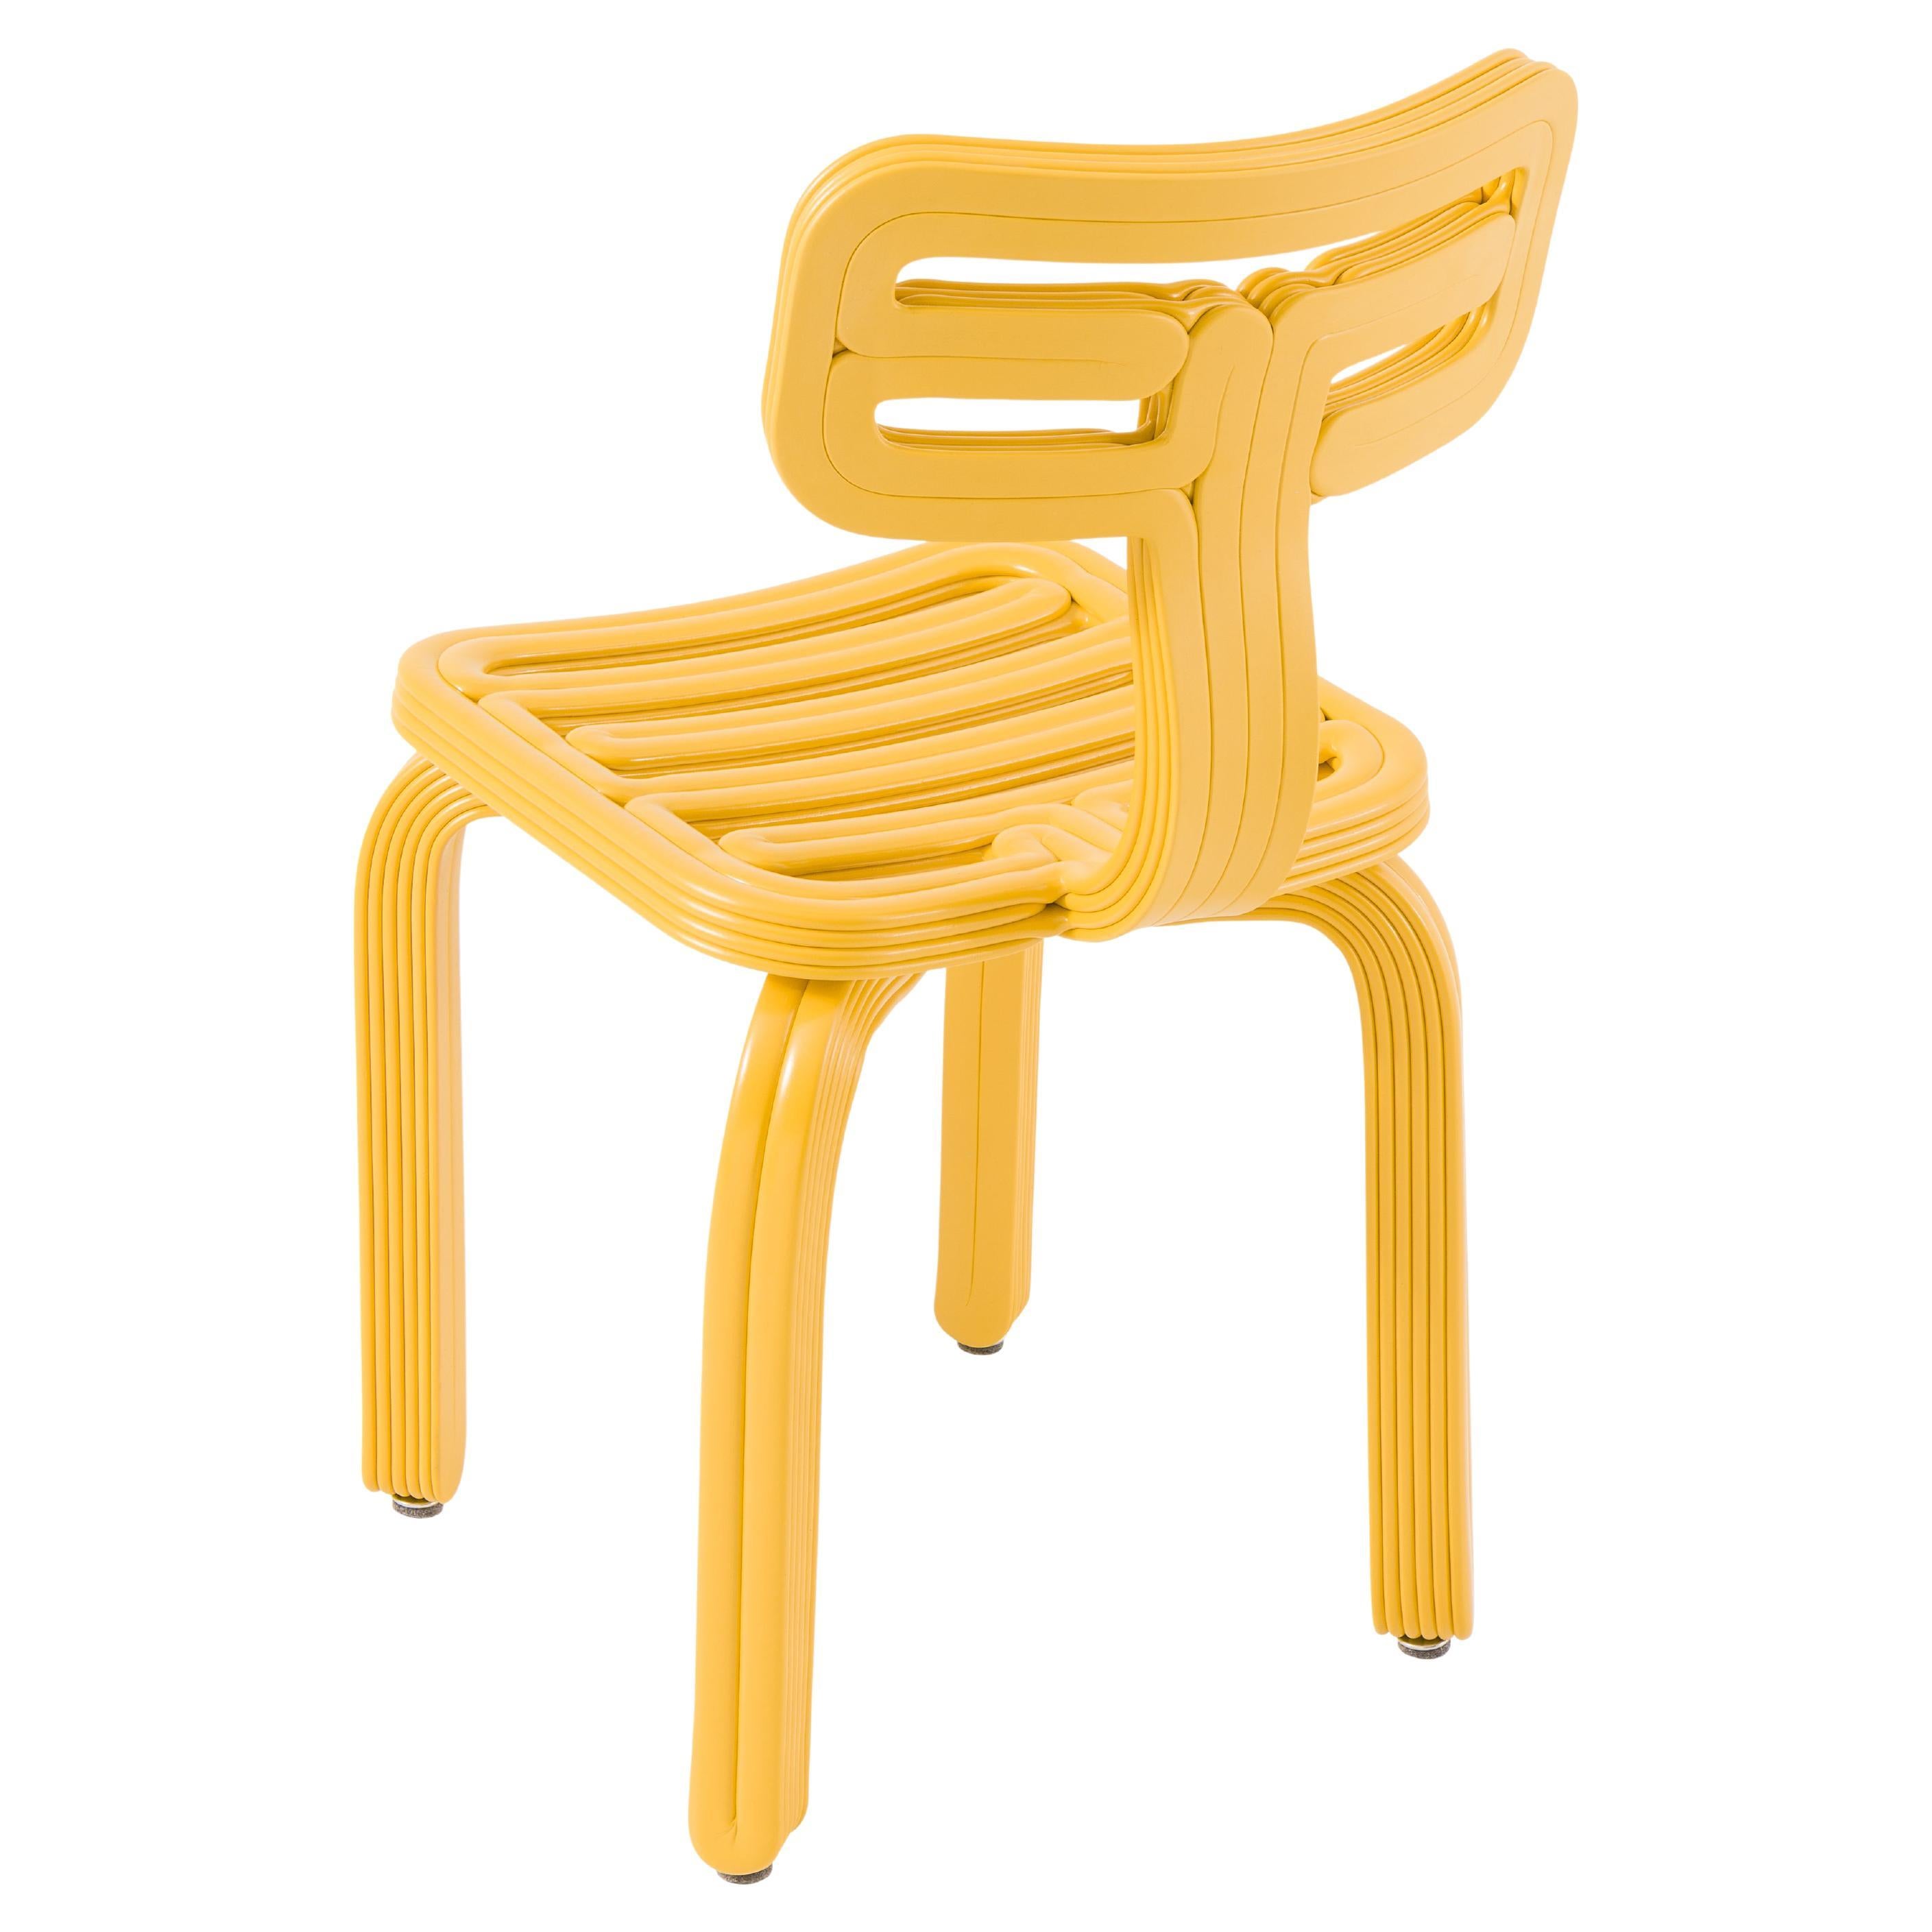 Yellow Chubby Chair in 3D Printed Recycled Plastic by KOOIJ